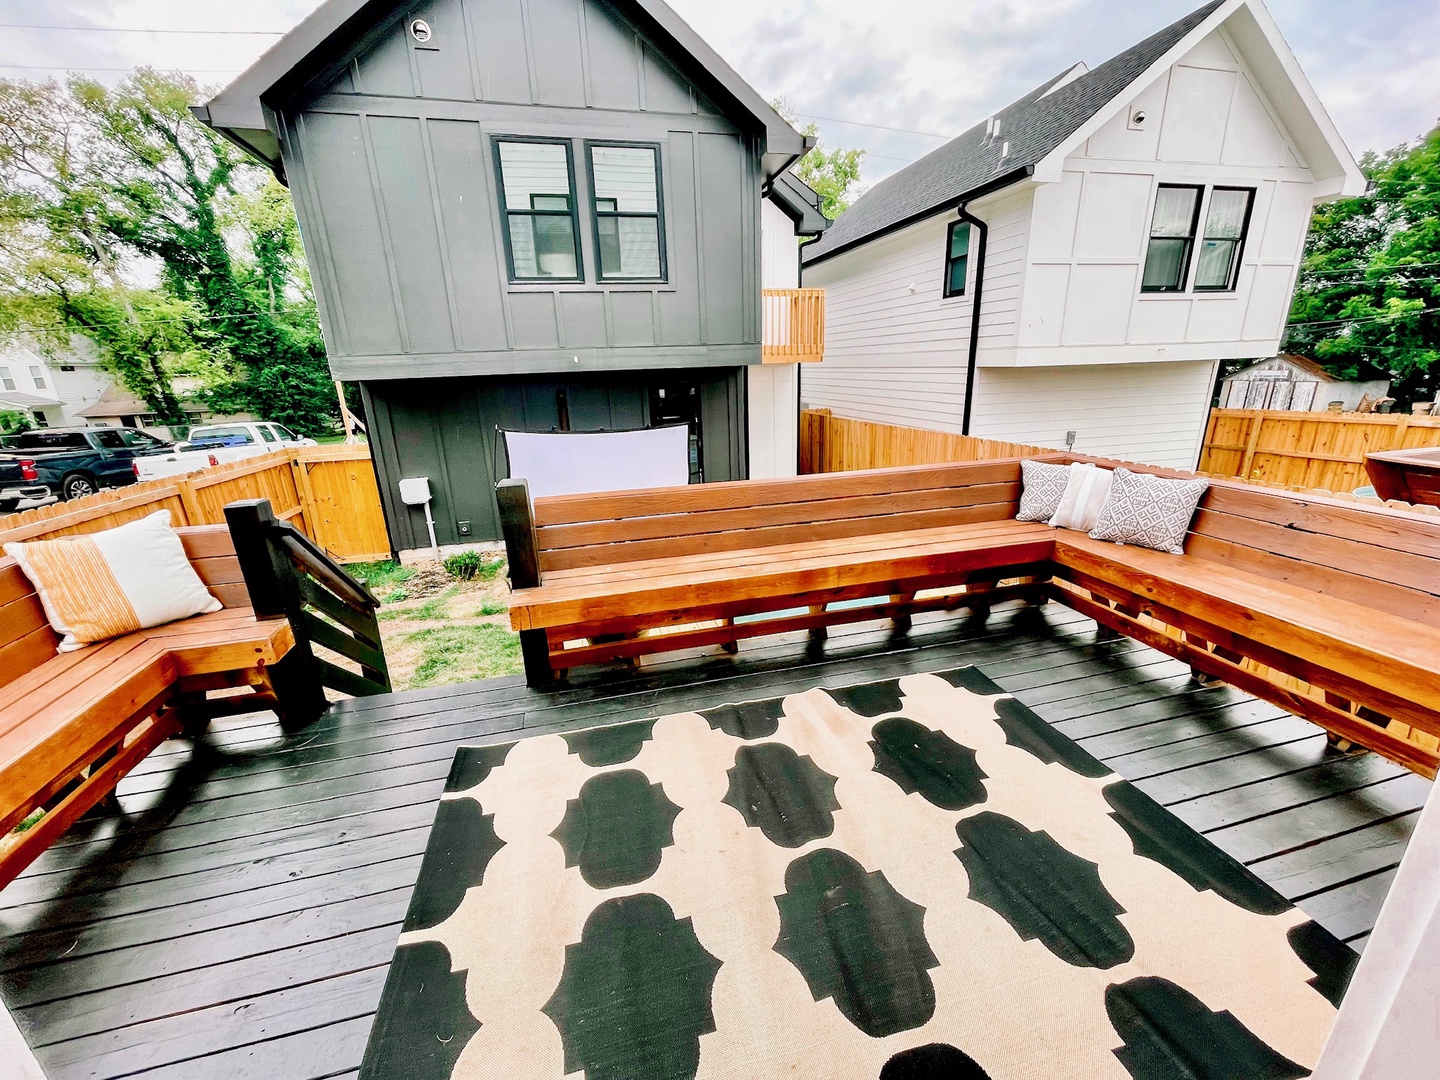 The back deck & yard offer ample space for relaxation & play